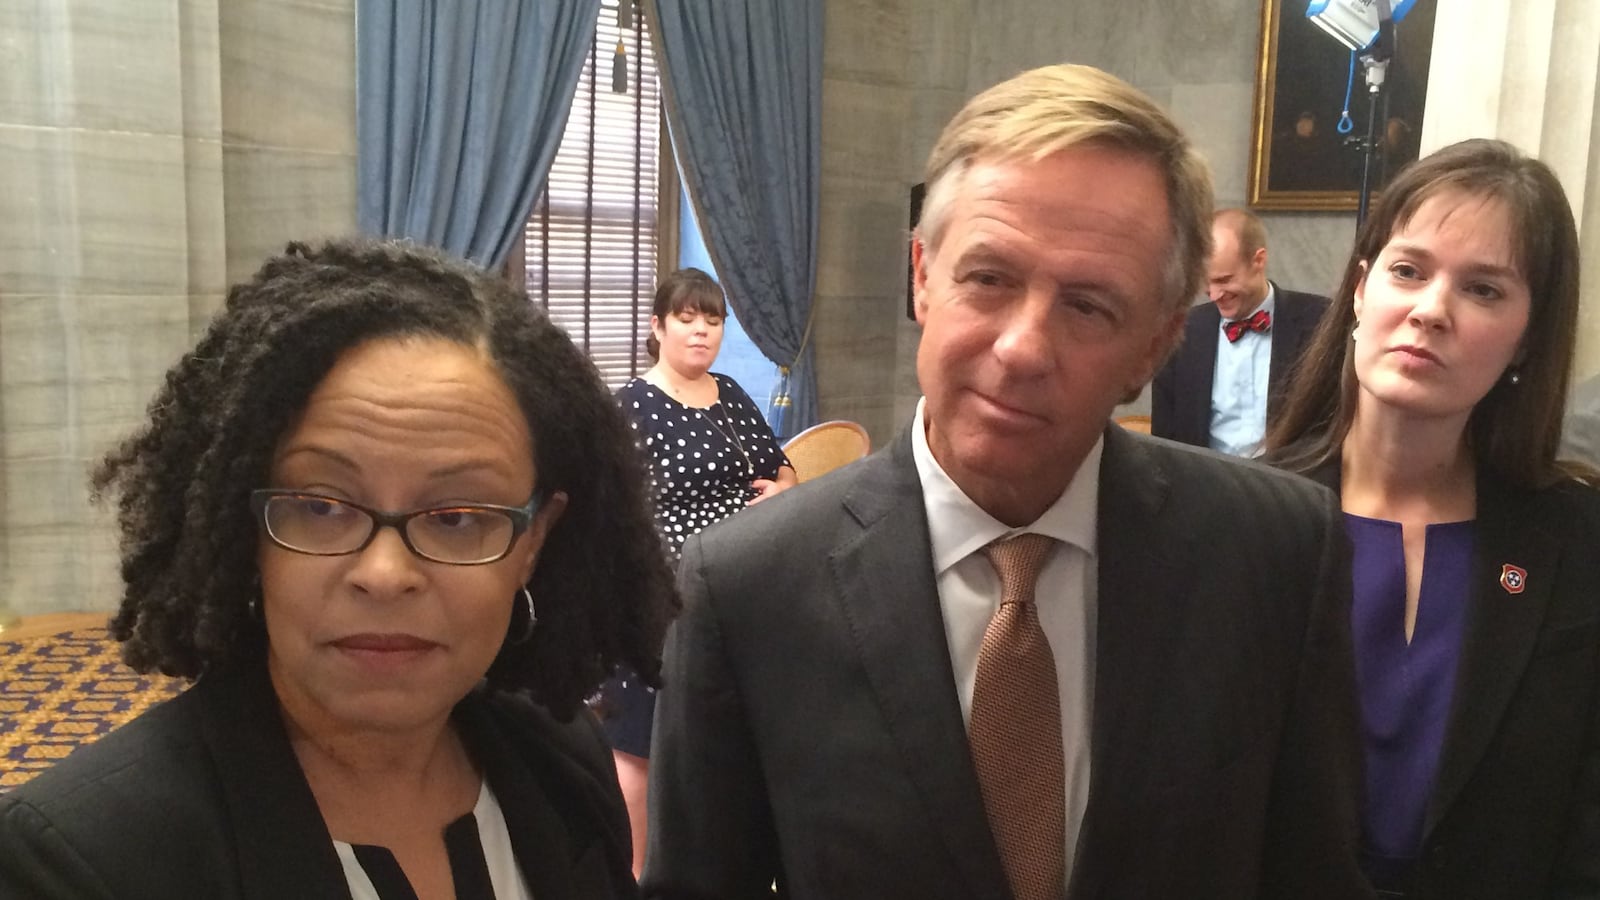 From left: Achievement School District Superintendent Malika Anderson answers questions at a 2015 news conference with Gov. Bill Haslam and Education Commissioner Candice McQueen.